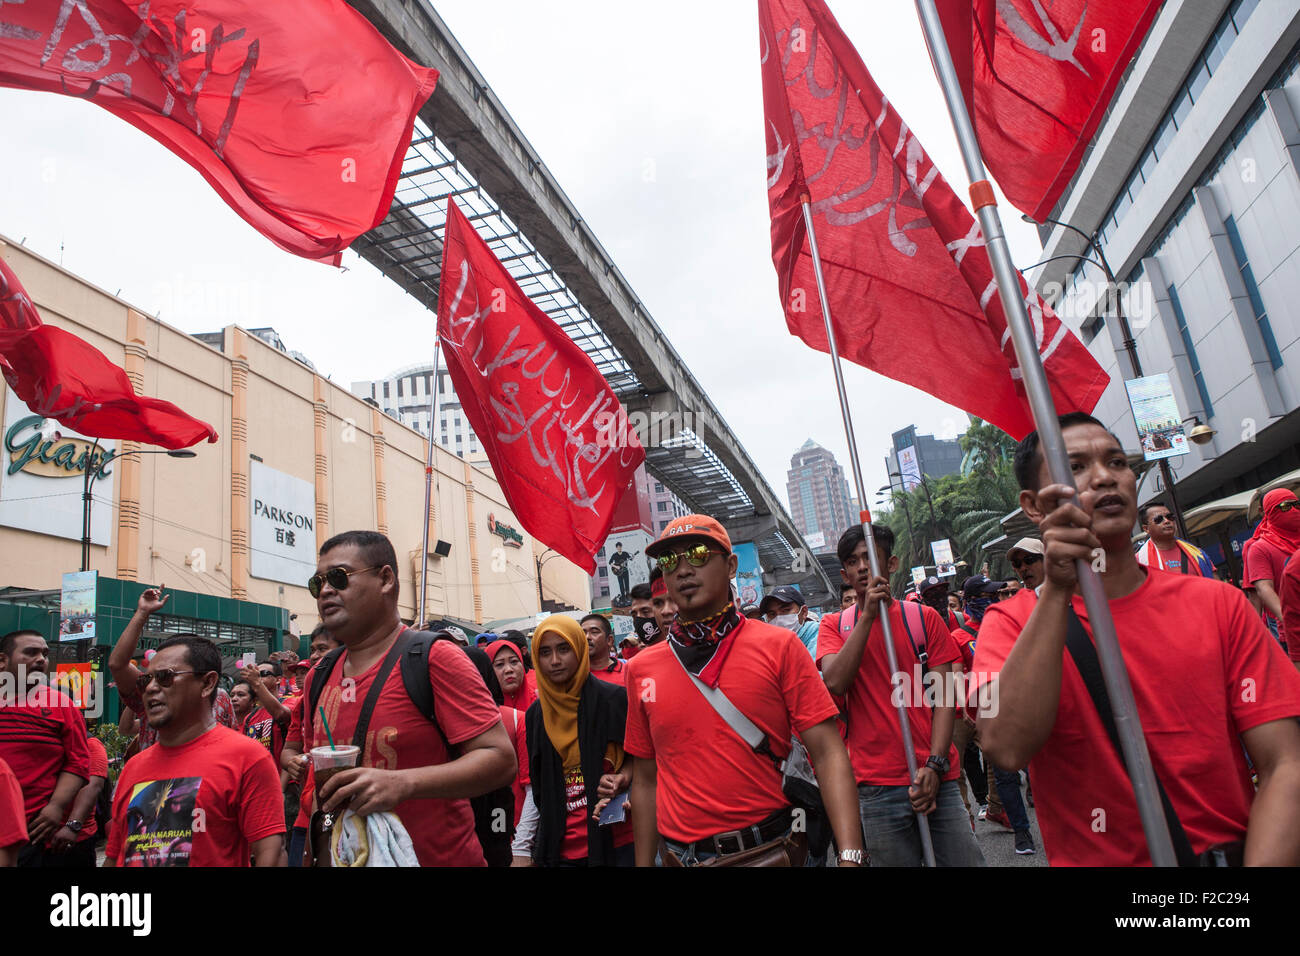 Kuala Lumpur, Malaysia. 16th Sep, 2015. Pro-government red shirt protesters take part in a demonstration in Kuala Lumpur, Malaysia, Wednesday 16 September, 2015. Thousands of pro-Malay demonstrators took to the streets of  Kuala Lumpur on Wednesday in a rally seen as promoting Malay supremacy in the multi-racial nation. Senior political figures and opposition parties voiced concern the rally could inflame racial tensions at a time when Prime Minister Najib Razak is under intense pressure to resign over an alleged corruption scandal. Credit:  Asia File/Alamy Live News Stock Photo